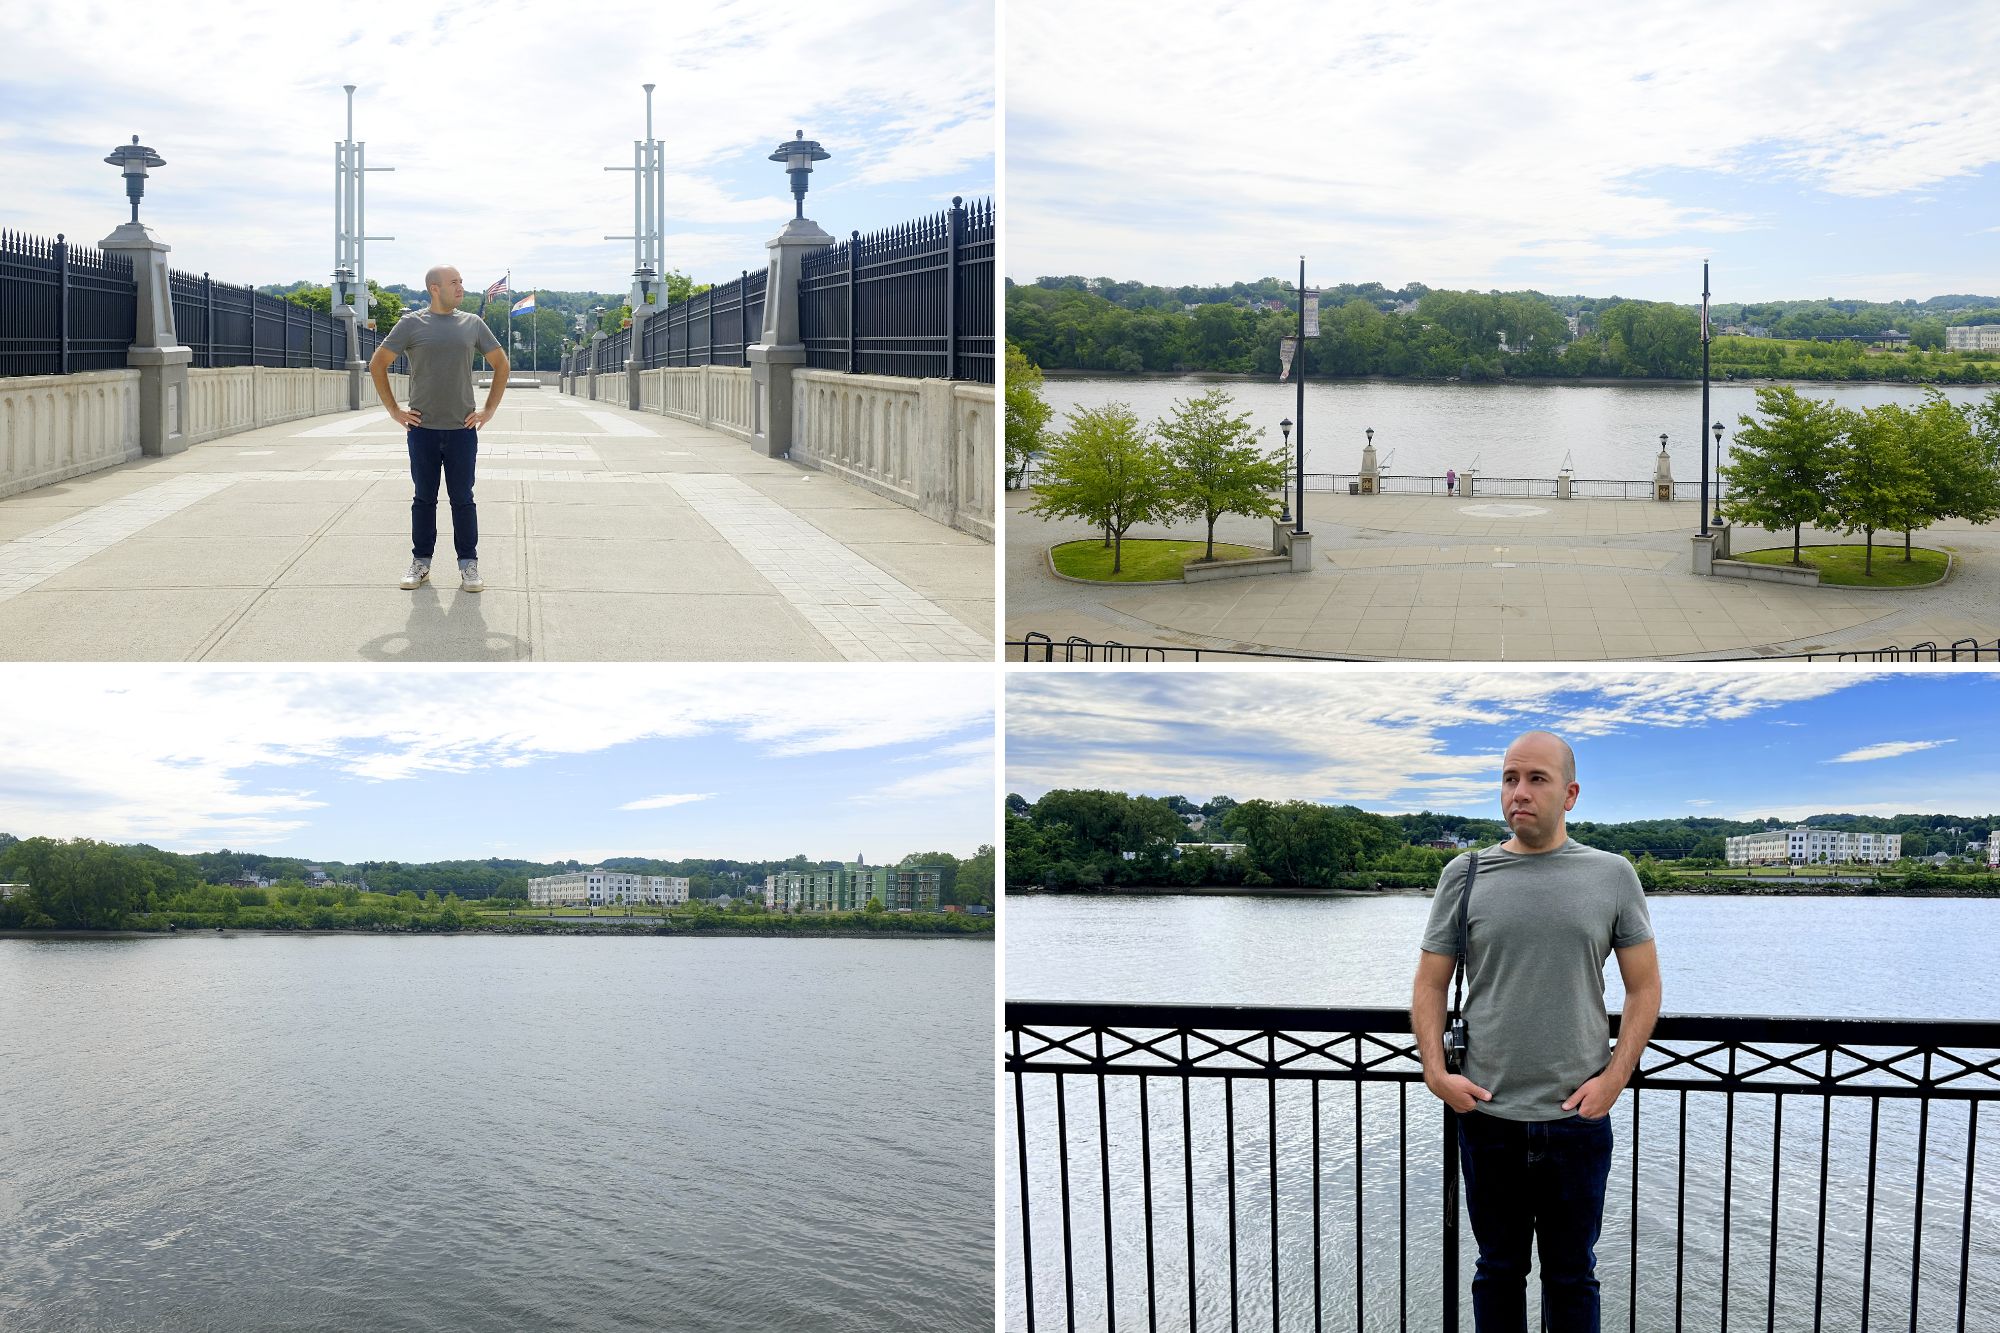 Photos of the park, and Michael standing on the bridge leading to Corning Preserve on the Hudson River